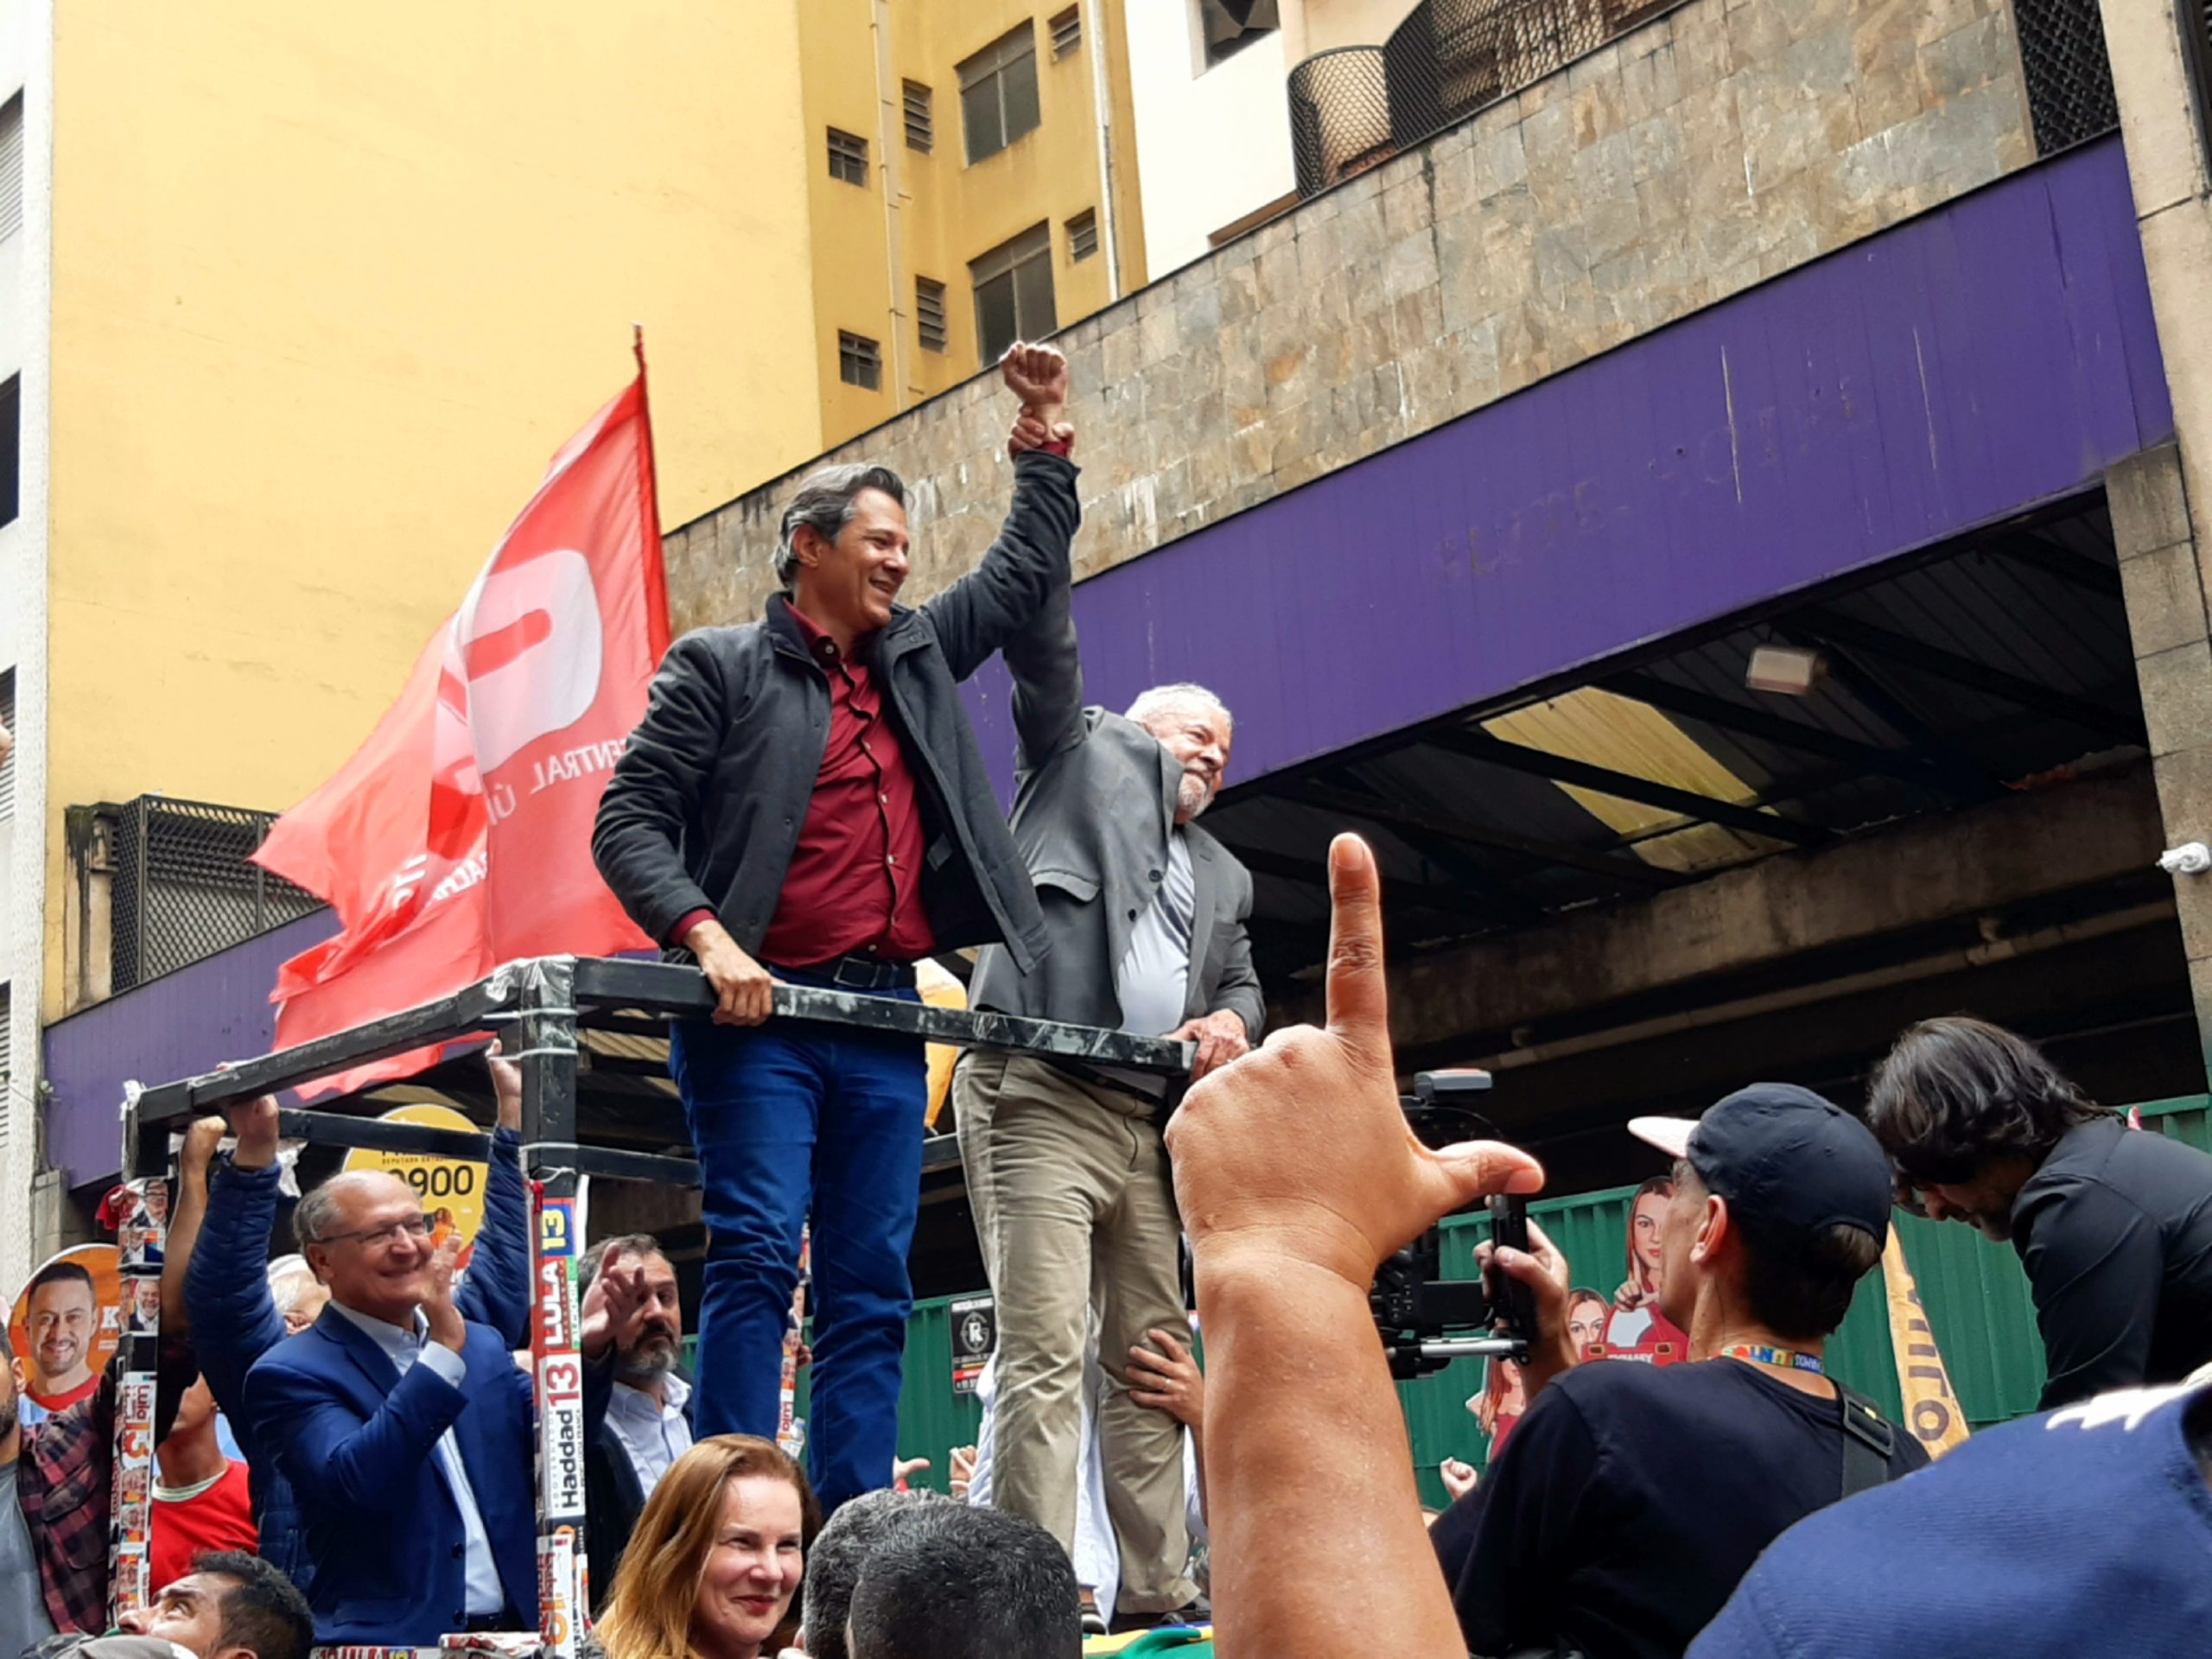 Workers' Party (PT) presidential candidate Luiz Inácio "Lula" da Silva with Fernando Haddad and Geraldo Alckmin, PT candidates for São Paolo governor and vice president, respectively / credit: Richard Matoušek